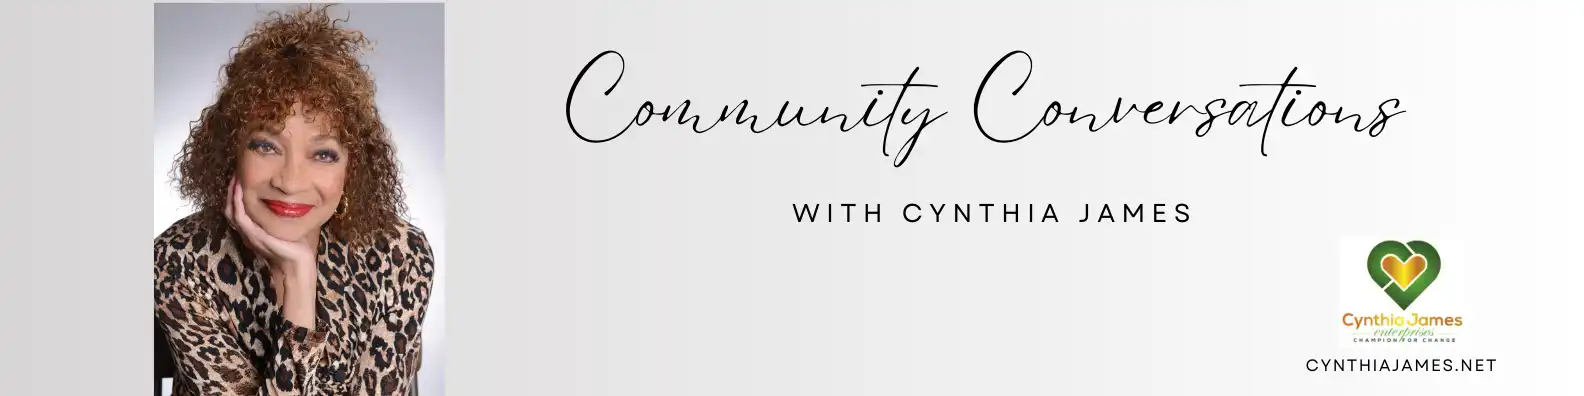 Community Conversations with Cynthia